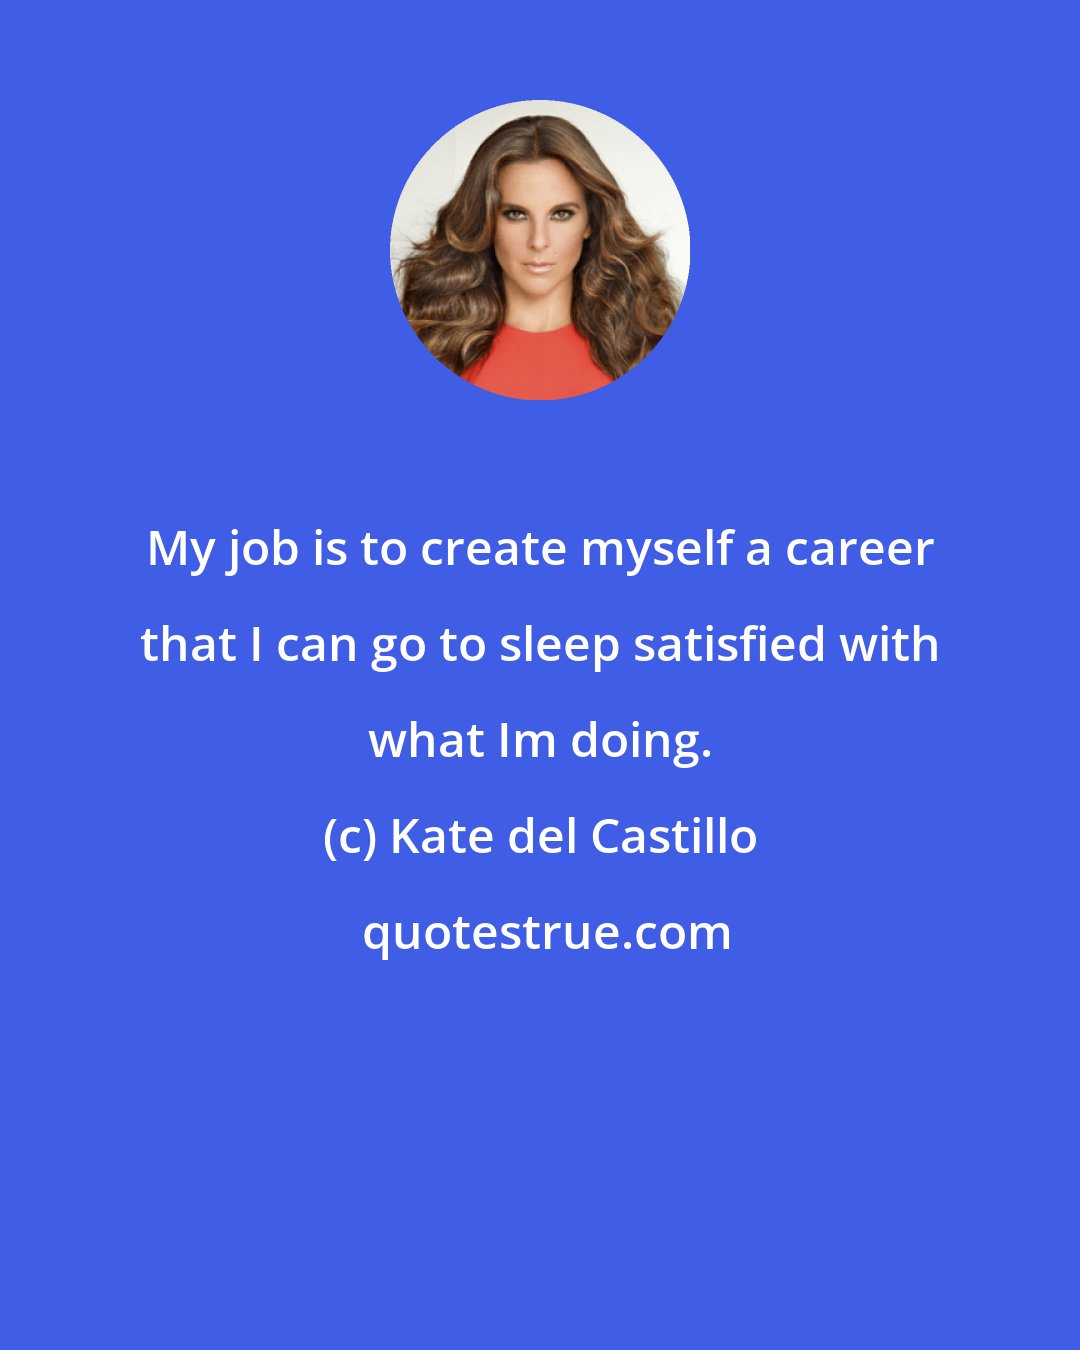 Kate del Castillo: My job is to create myself a career that I can go to sleep satisfied with what Im doing.